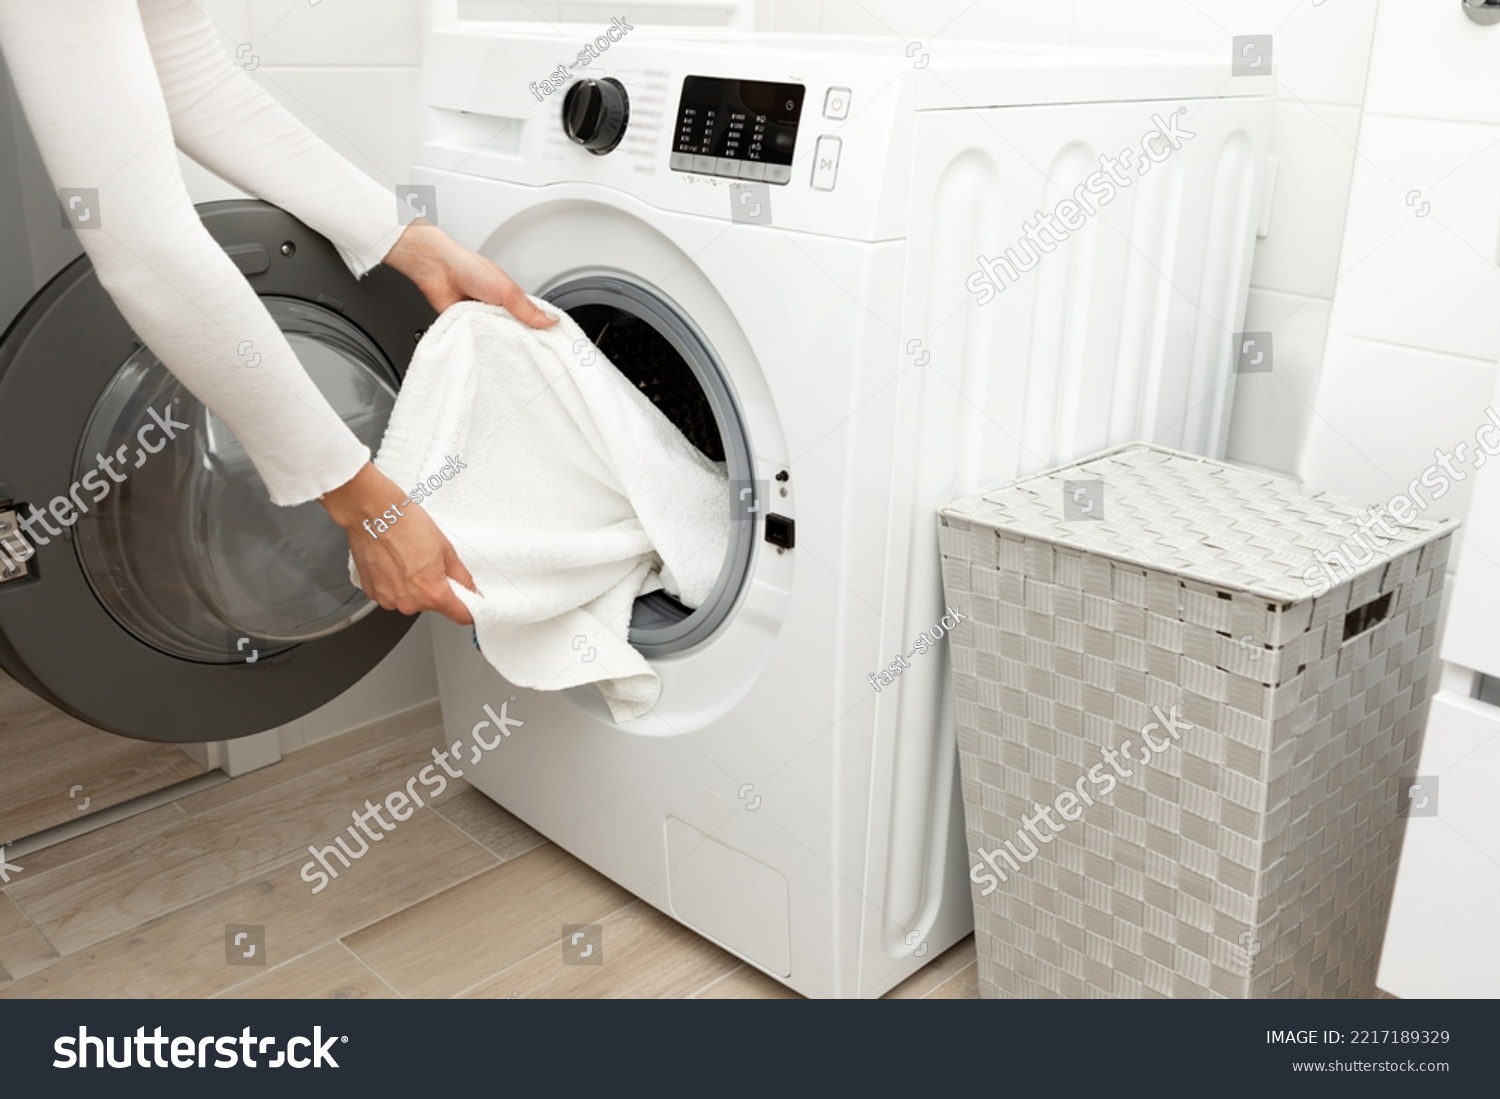 General shot of a washing machine loaded with clothes #2217189329